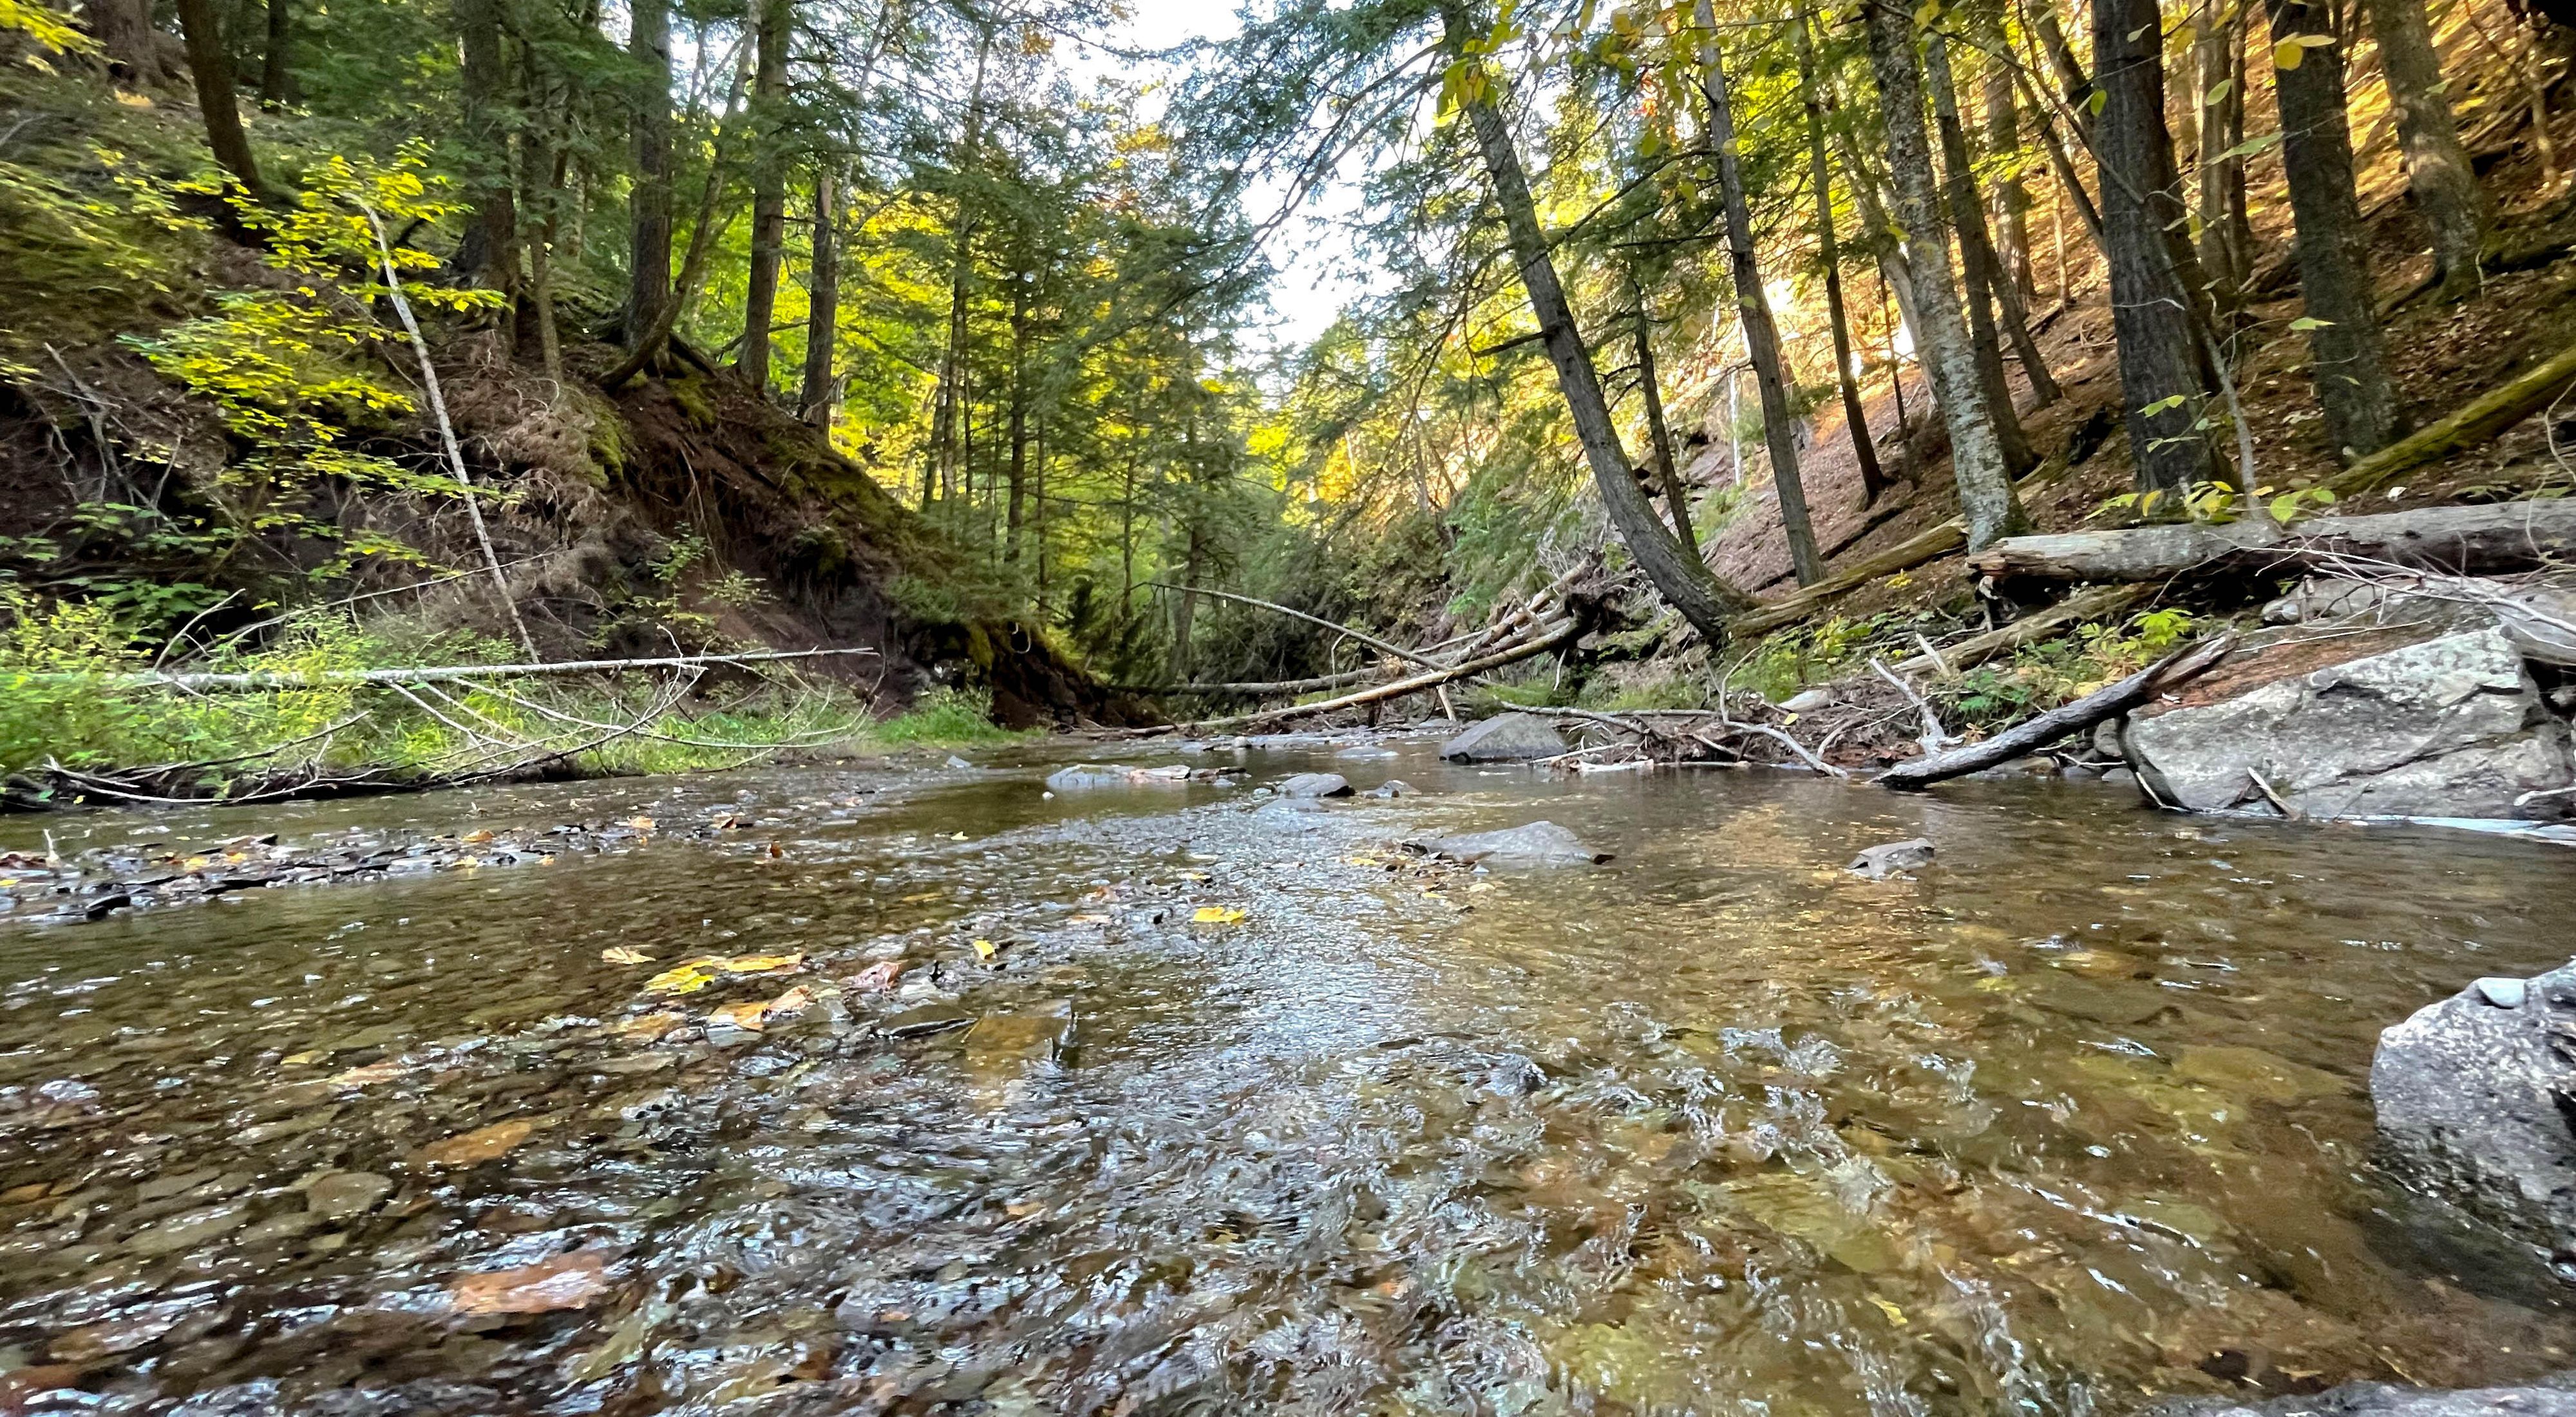 Looking downstream in a shallow forested river with water rippling over rocks.